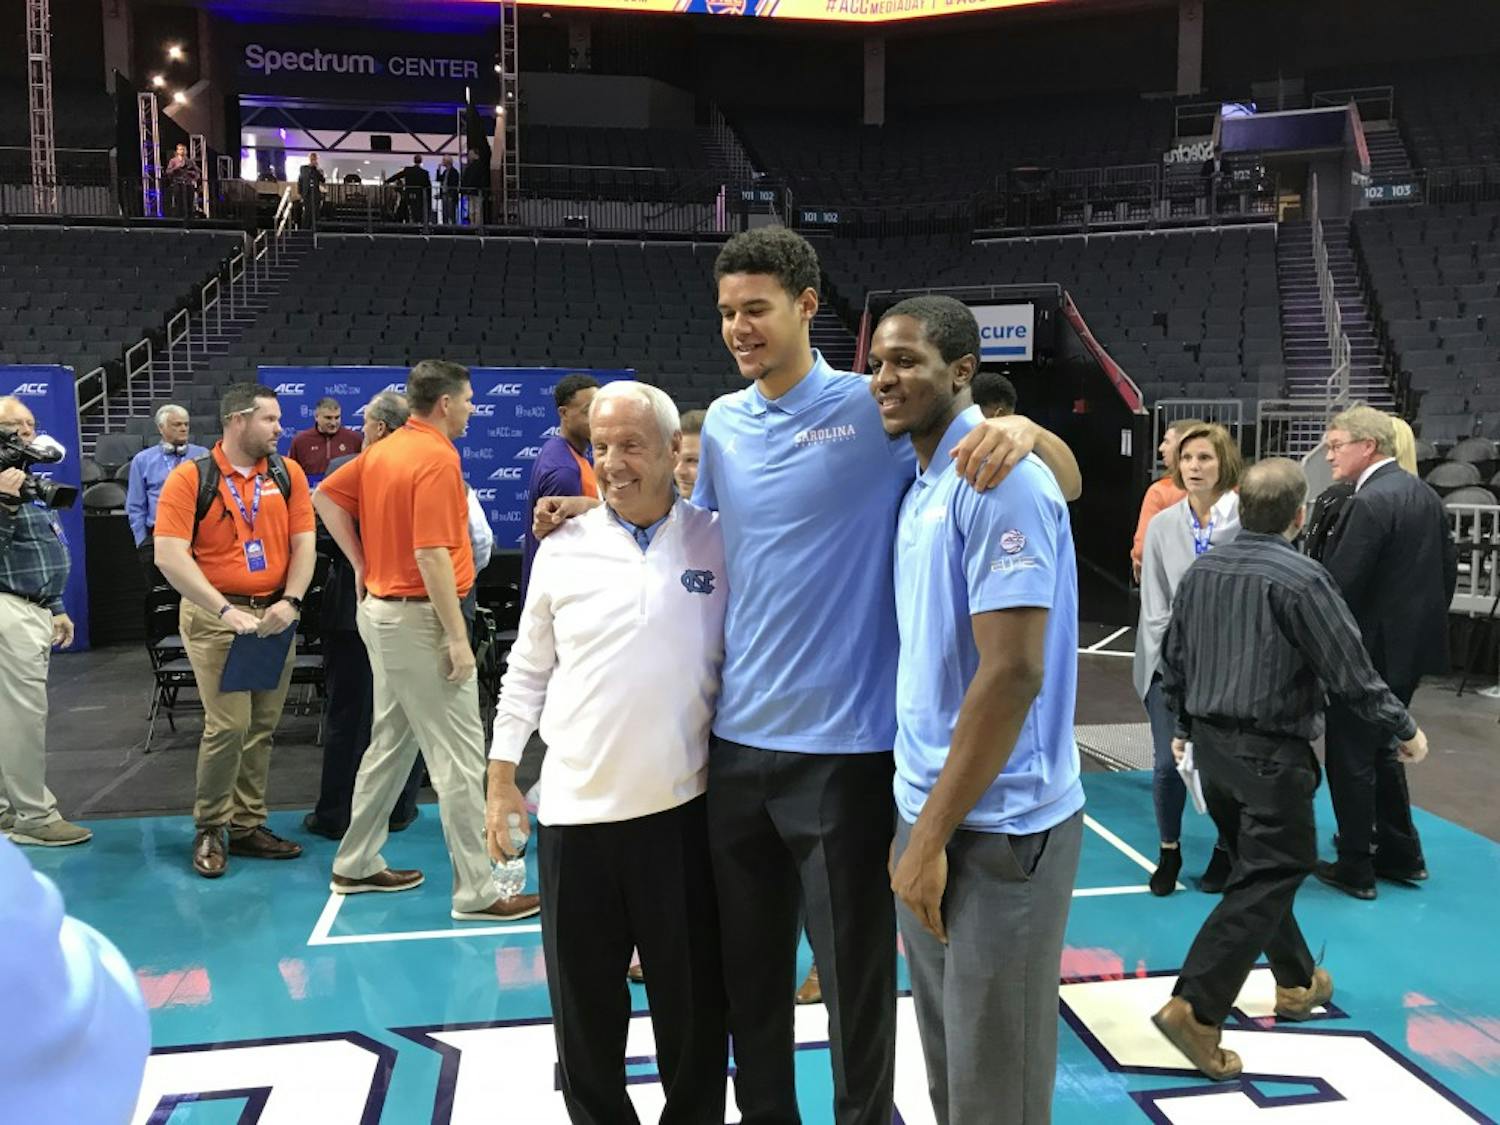 UNC men's basketball head coach Roy Williams and guards Cam Johnson and Kenny Williams pose for a picture at the Spectrum Center for ACC men's basketball media day on Oct. 24.